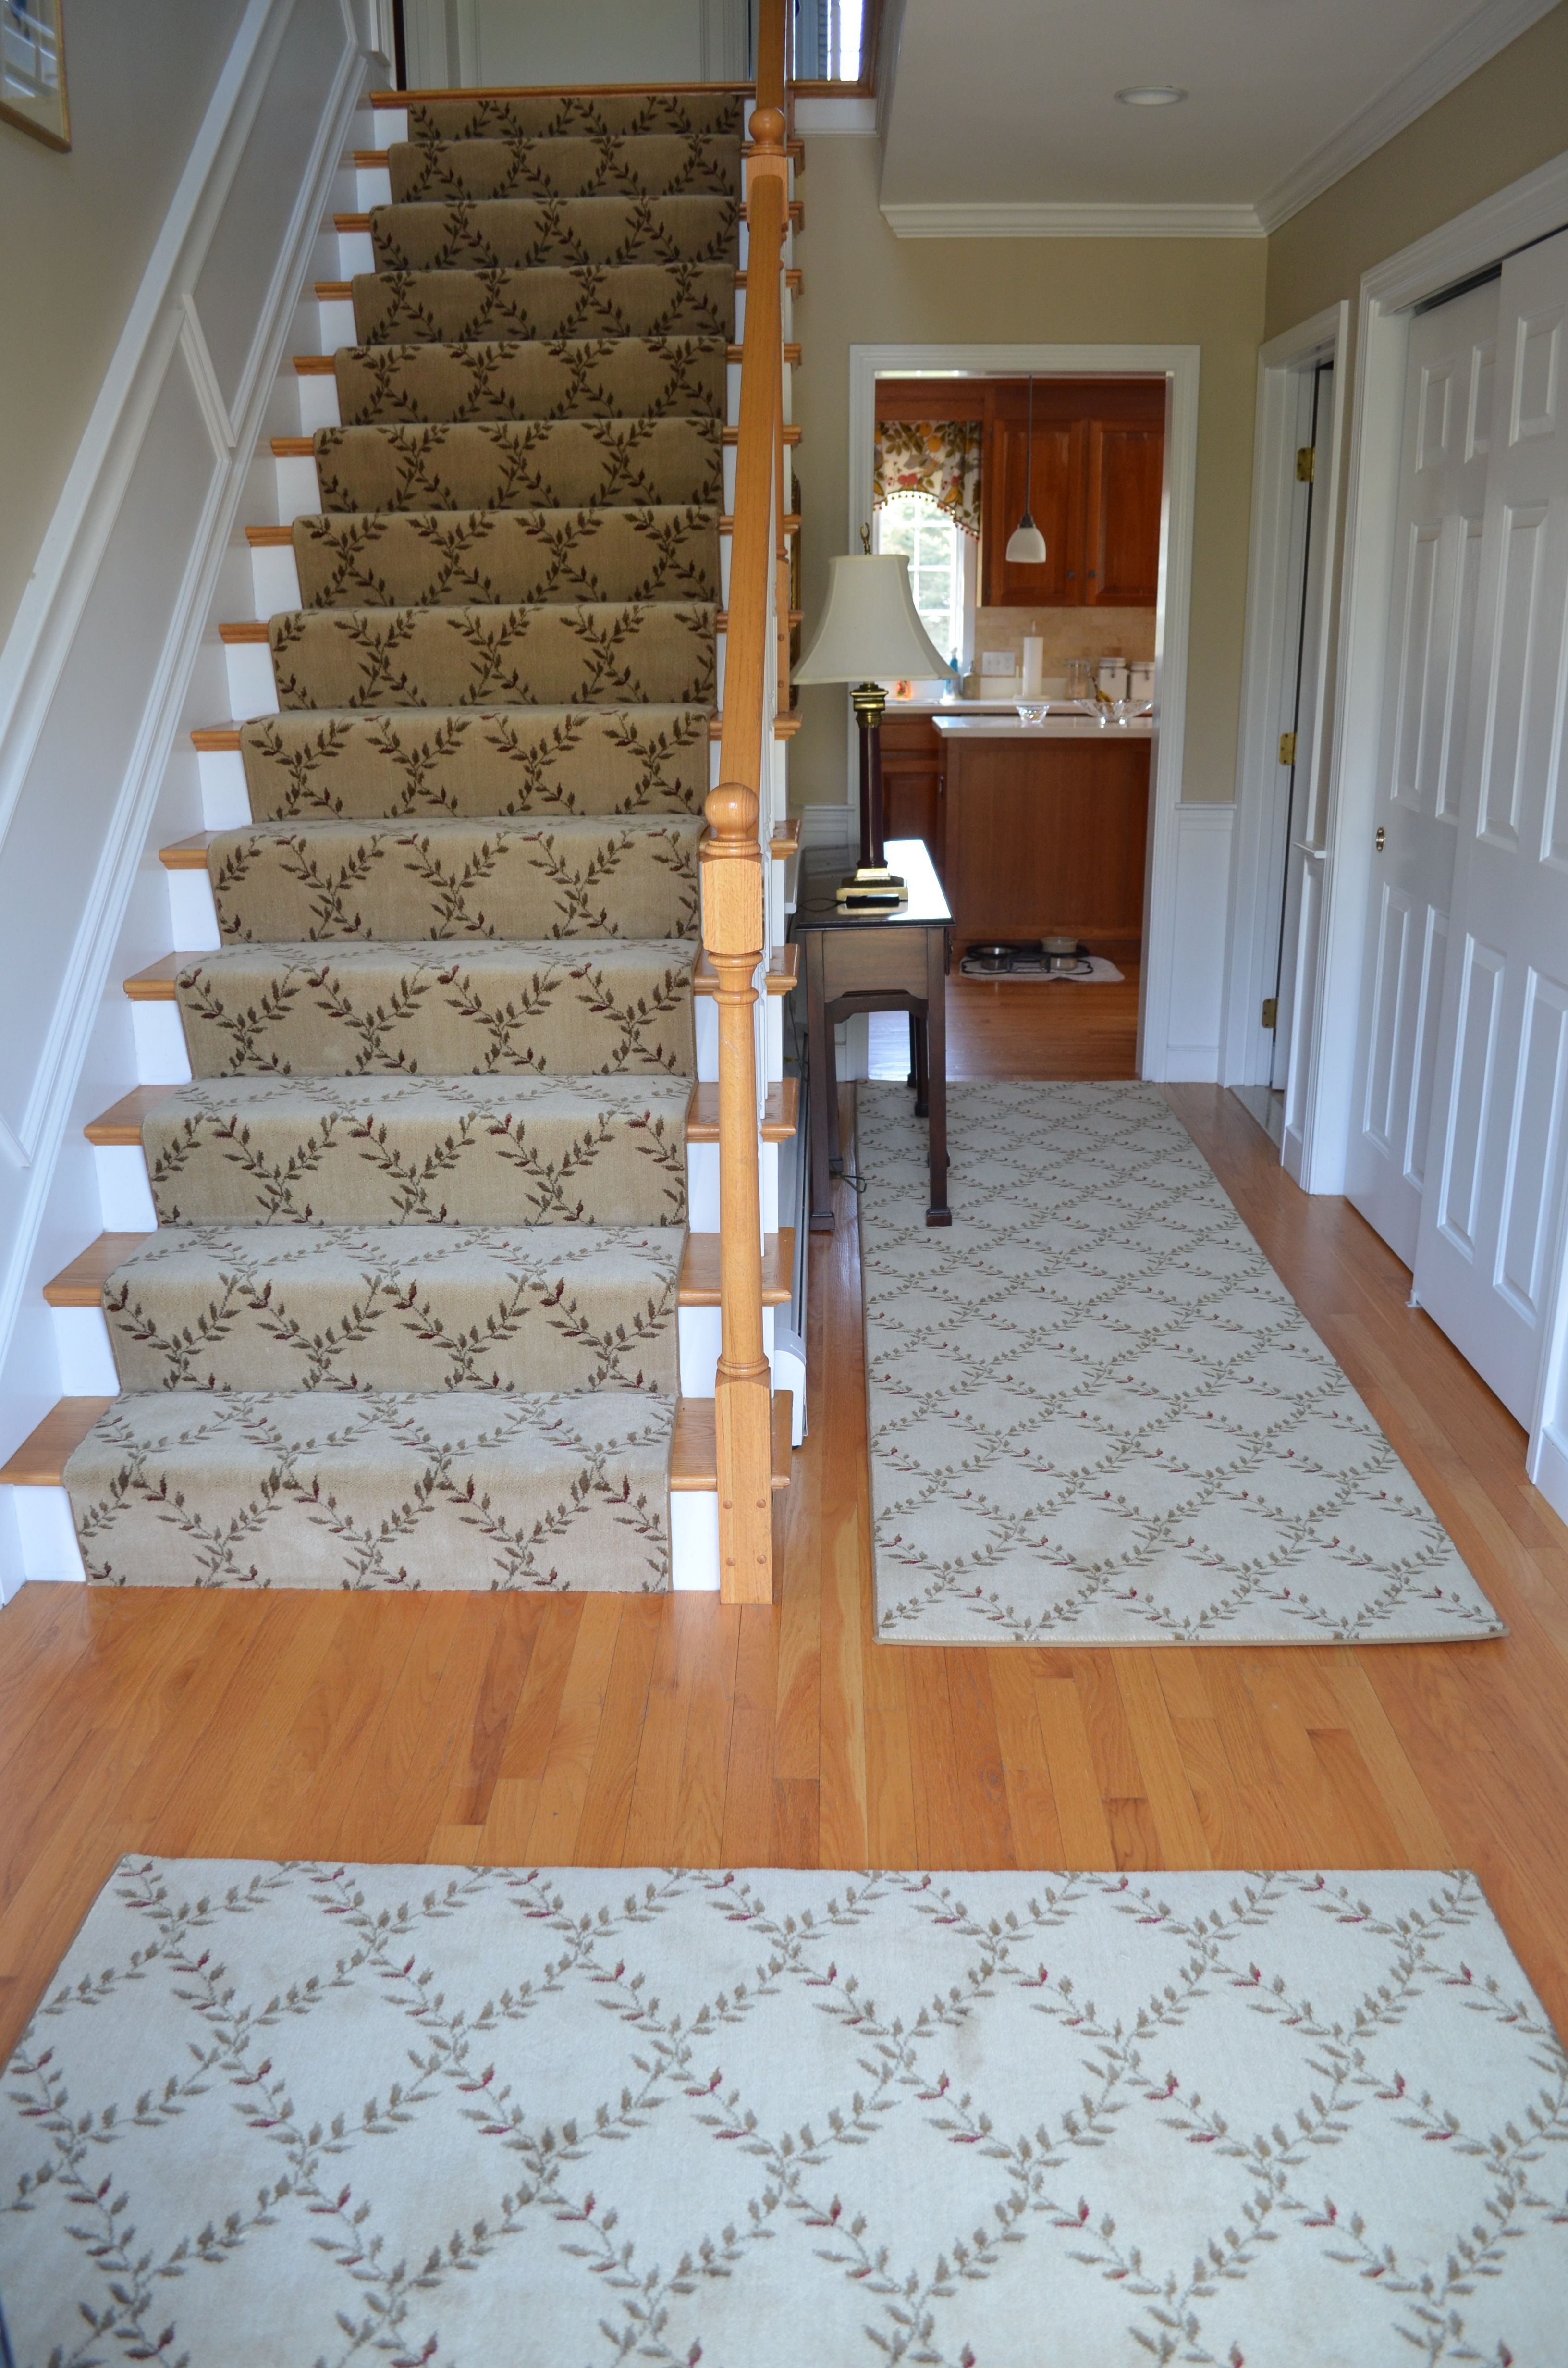 Carpet Runner For Stairs Intended For Runner Hallway Rugs (View 6 of 20)